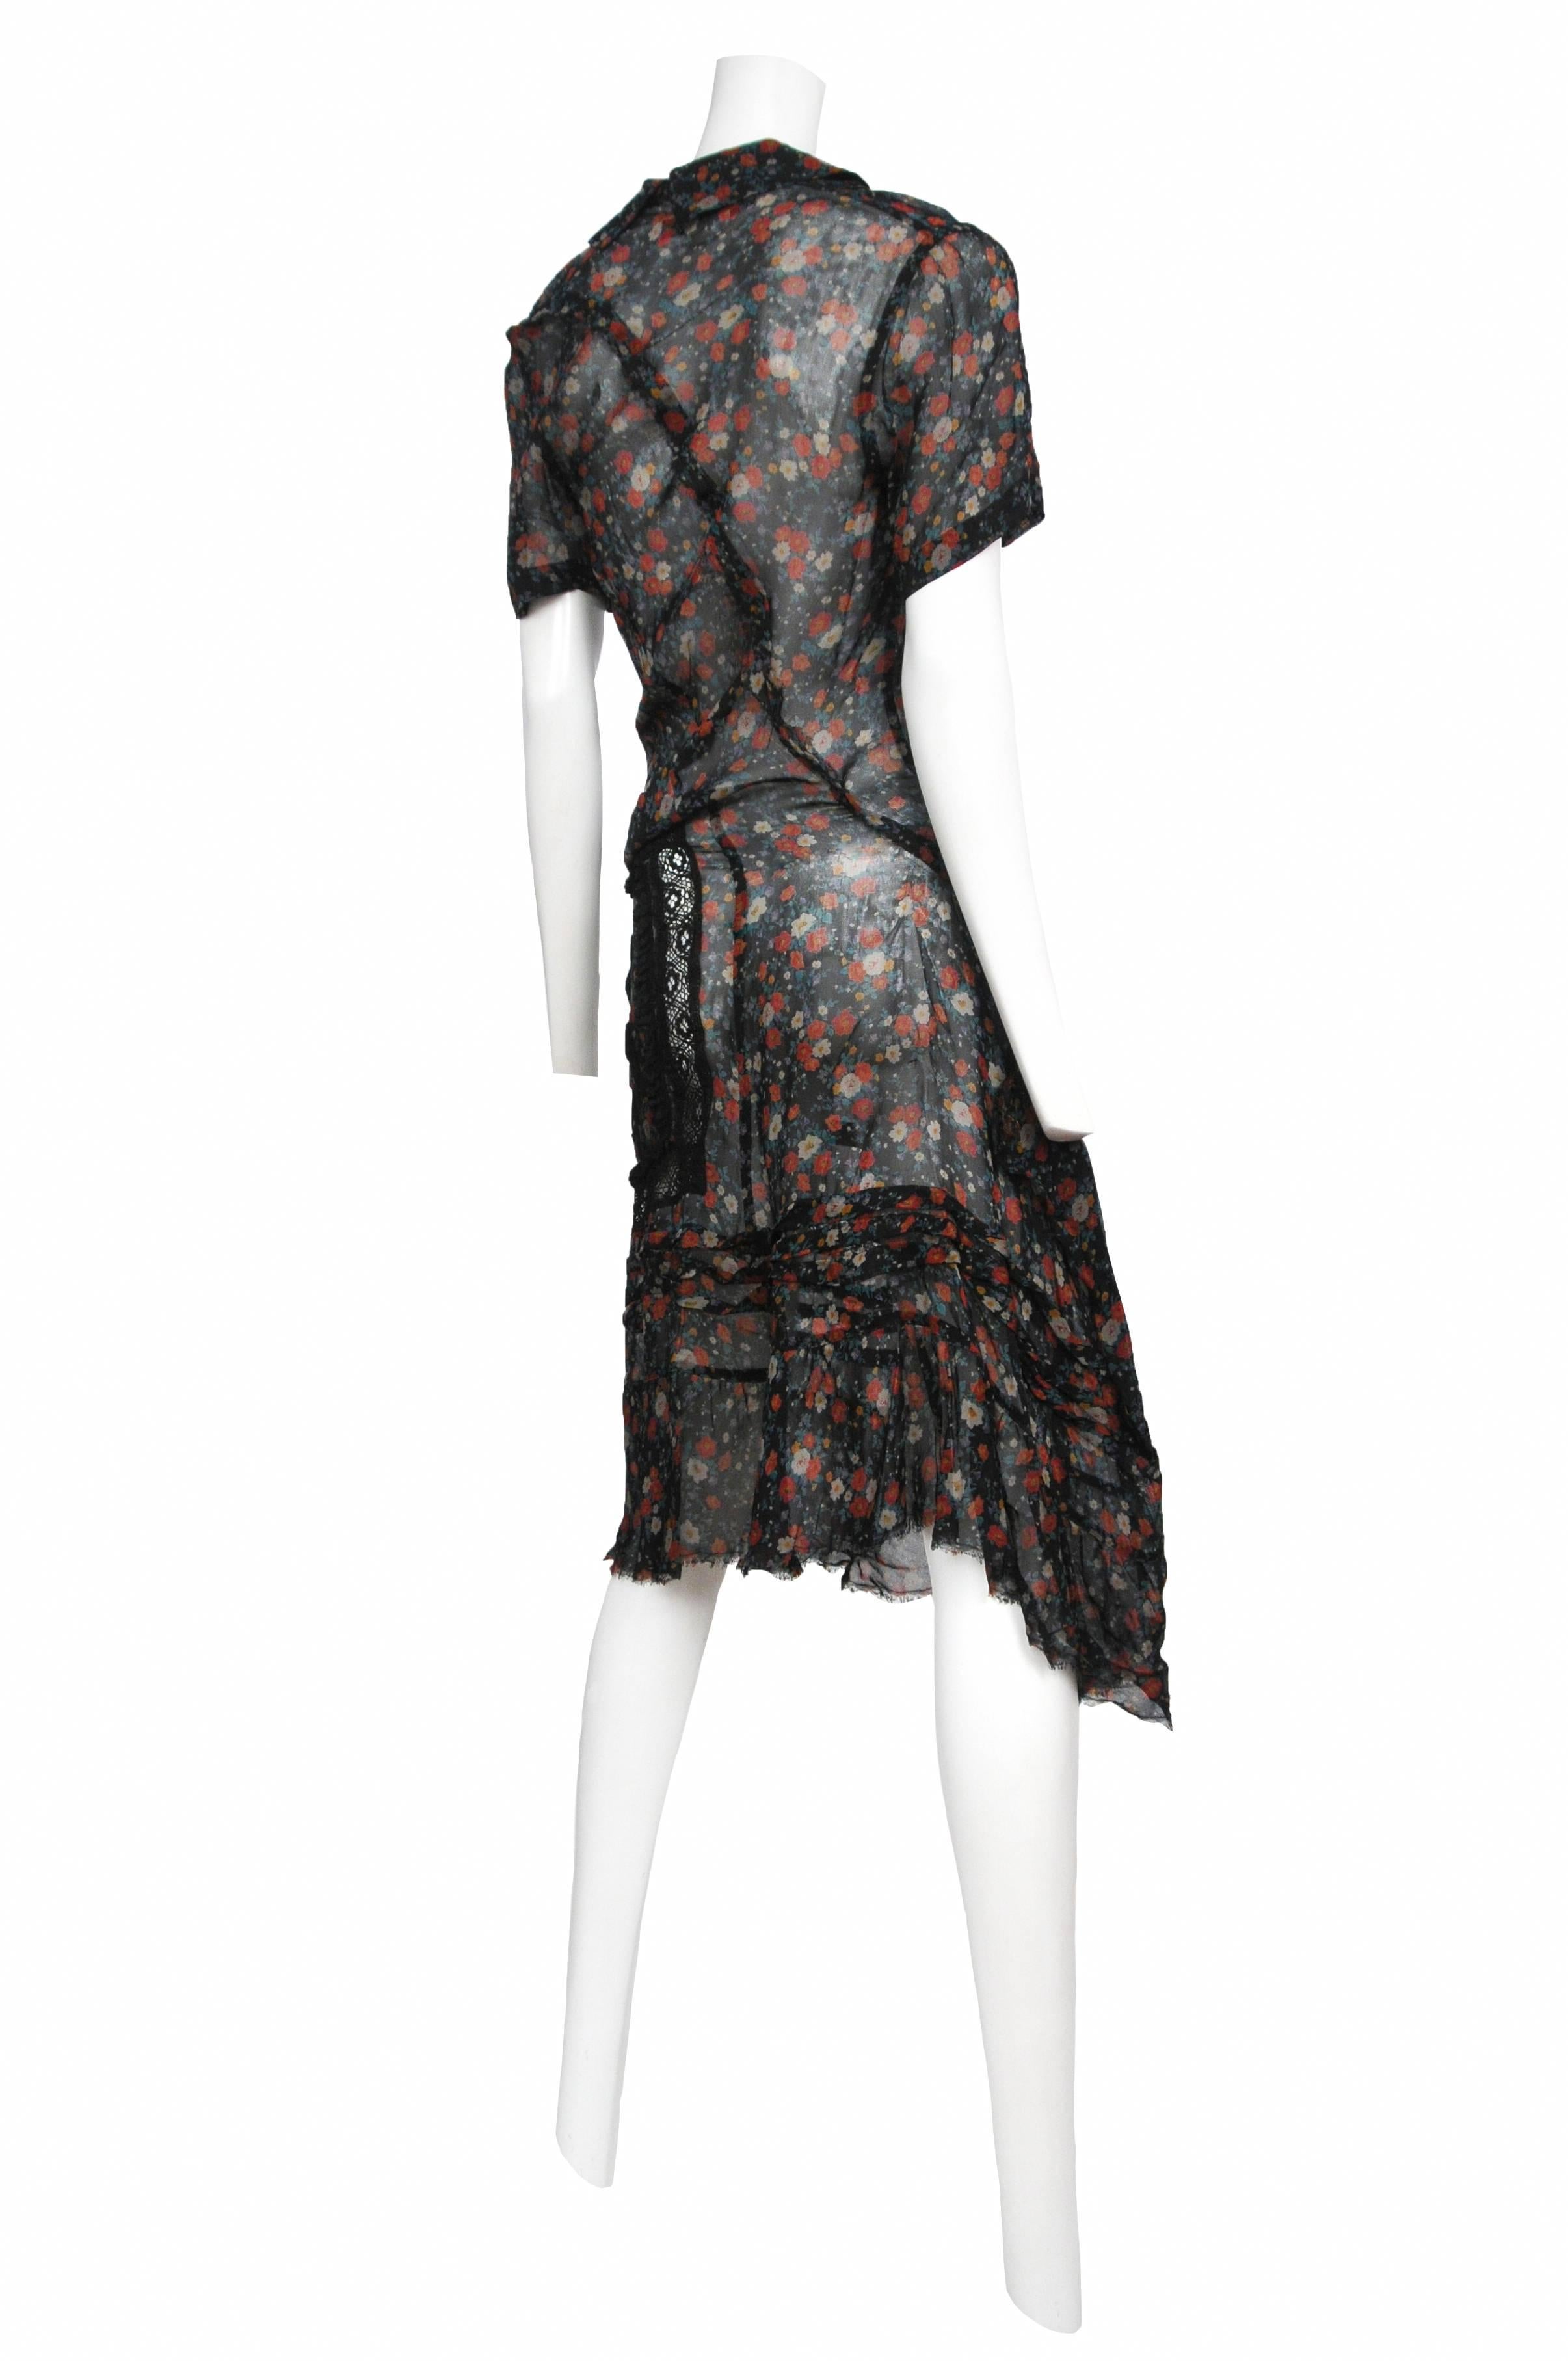 Vintage Junya Watanabe for Comme des Garcons floral & lace twist dress with asymmetrical collar, lace paneling and button up front. Circa Fall/Winter 2007.